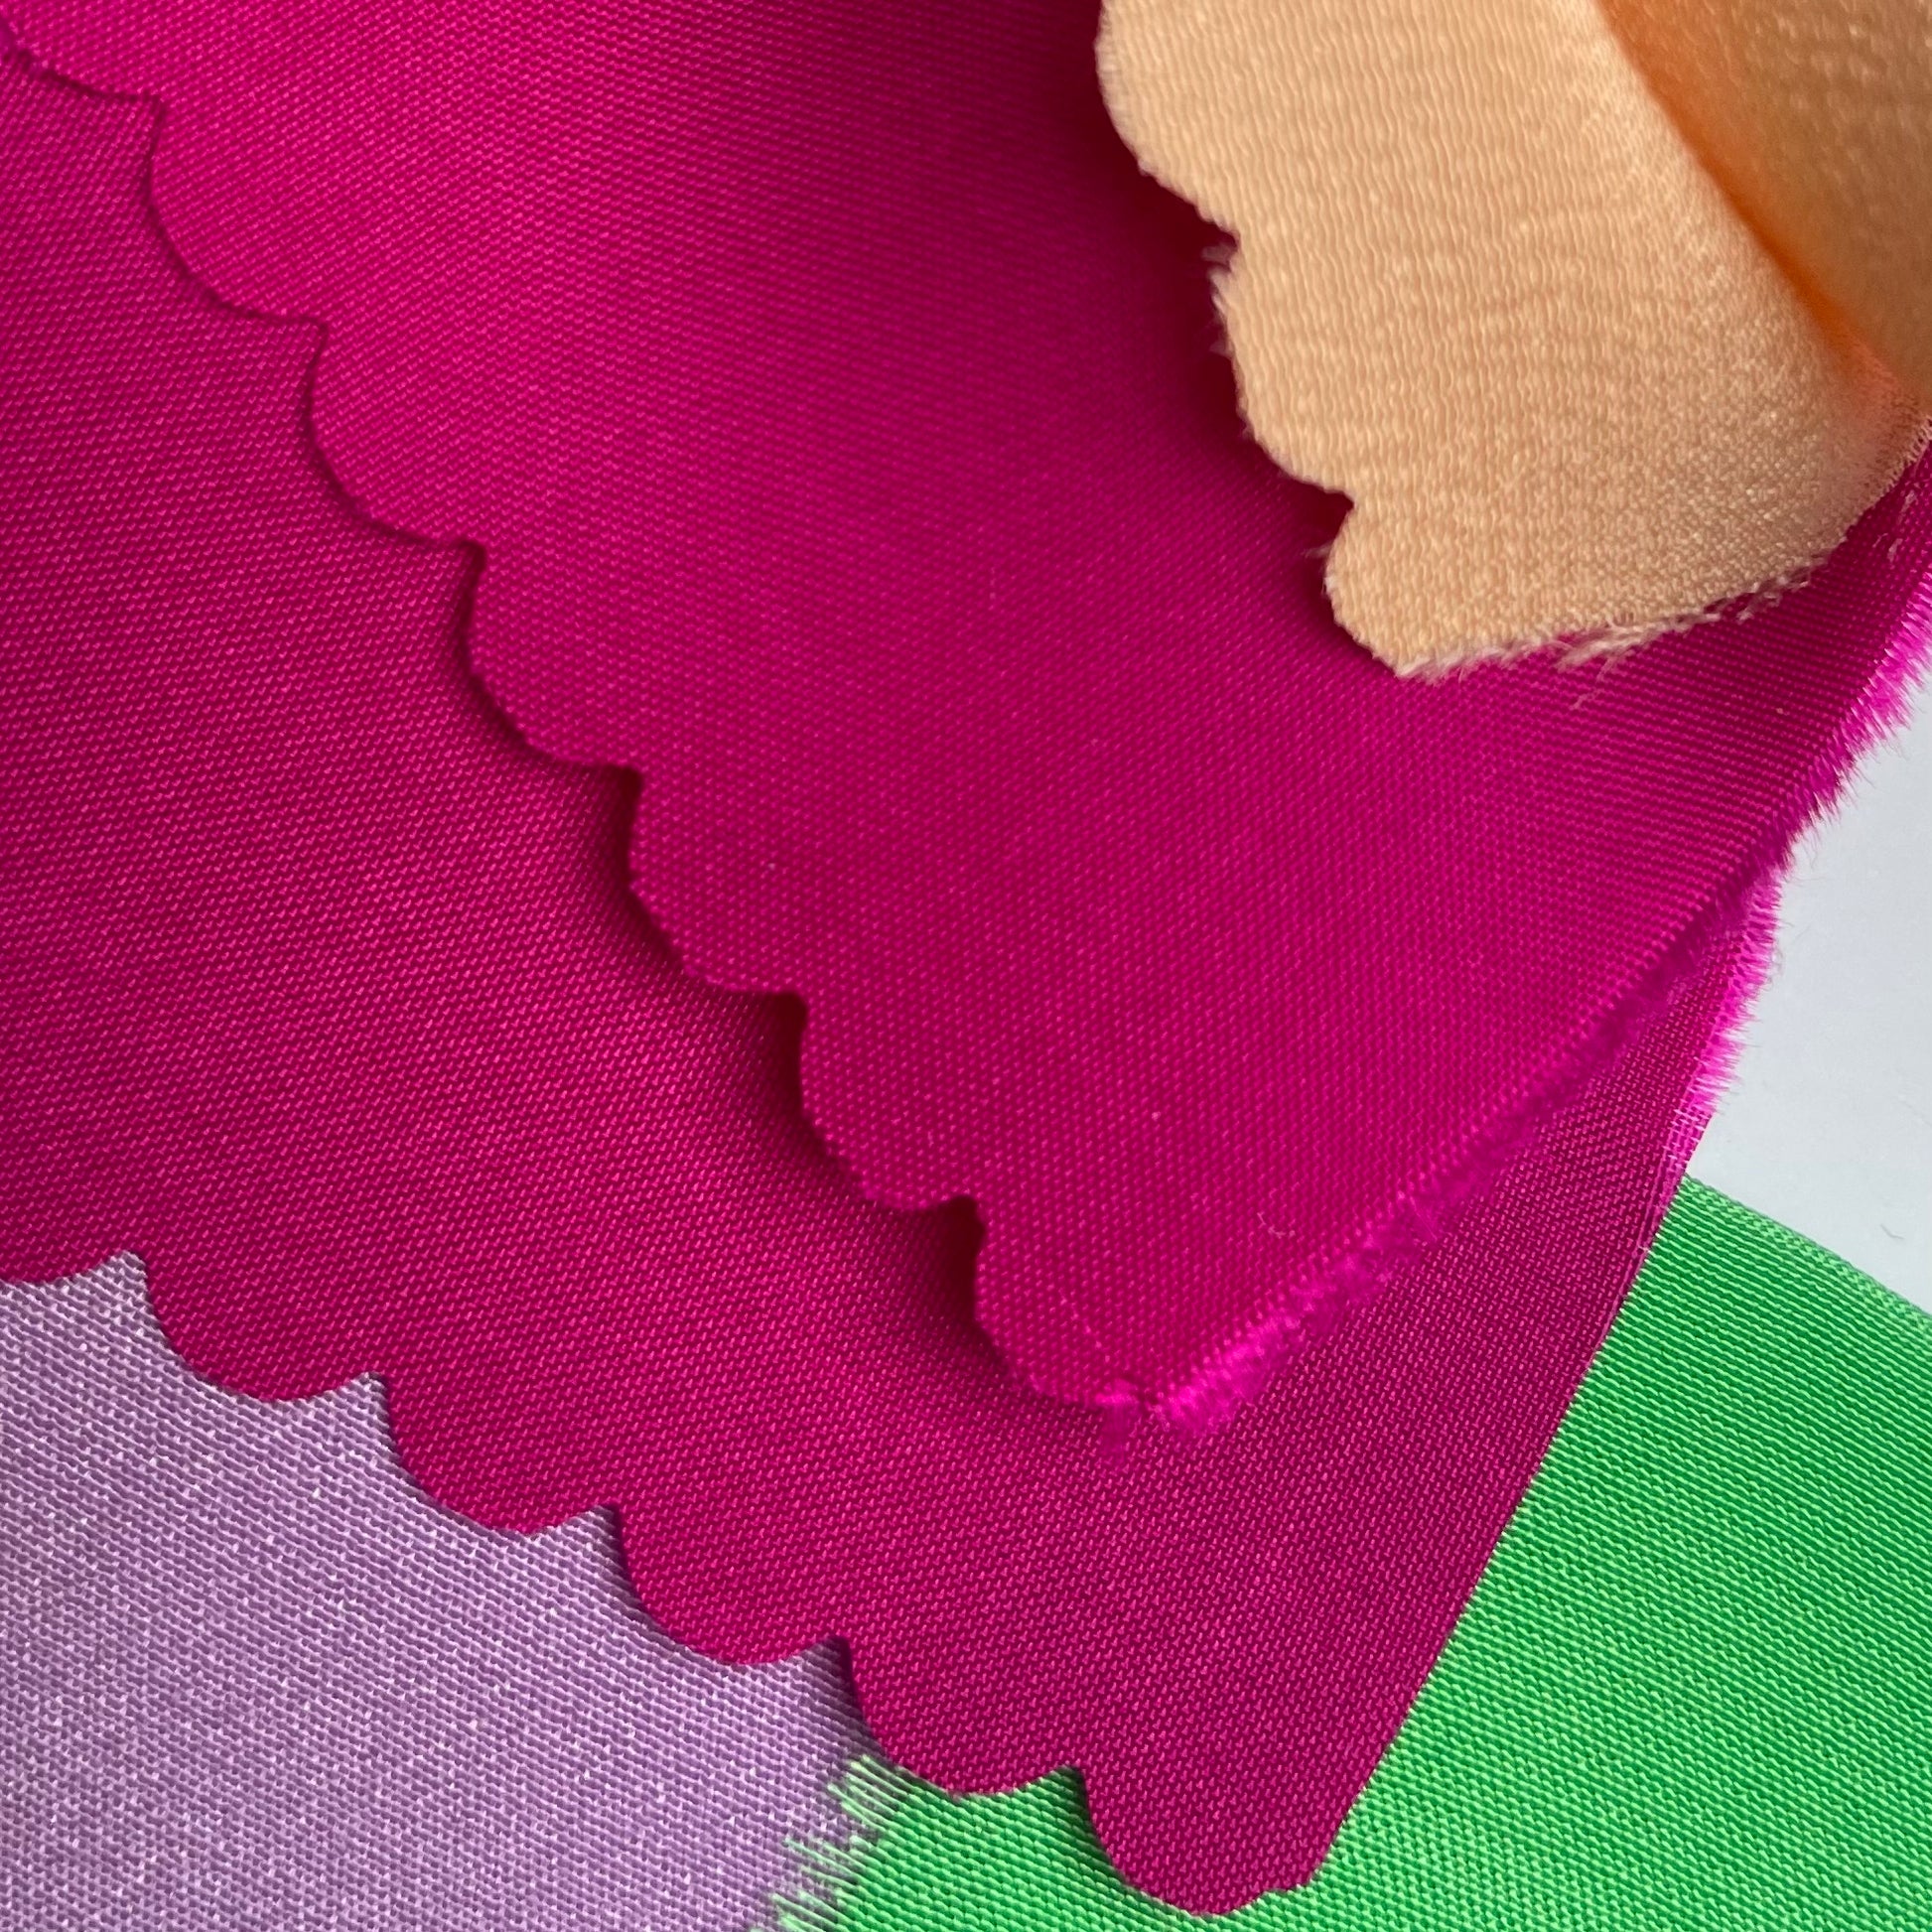 Close-up of fabrics used to make the appliques on the artwork. Green, lilac, hot pink and peach fabric can be seen